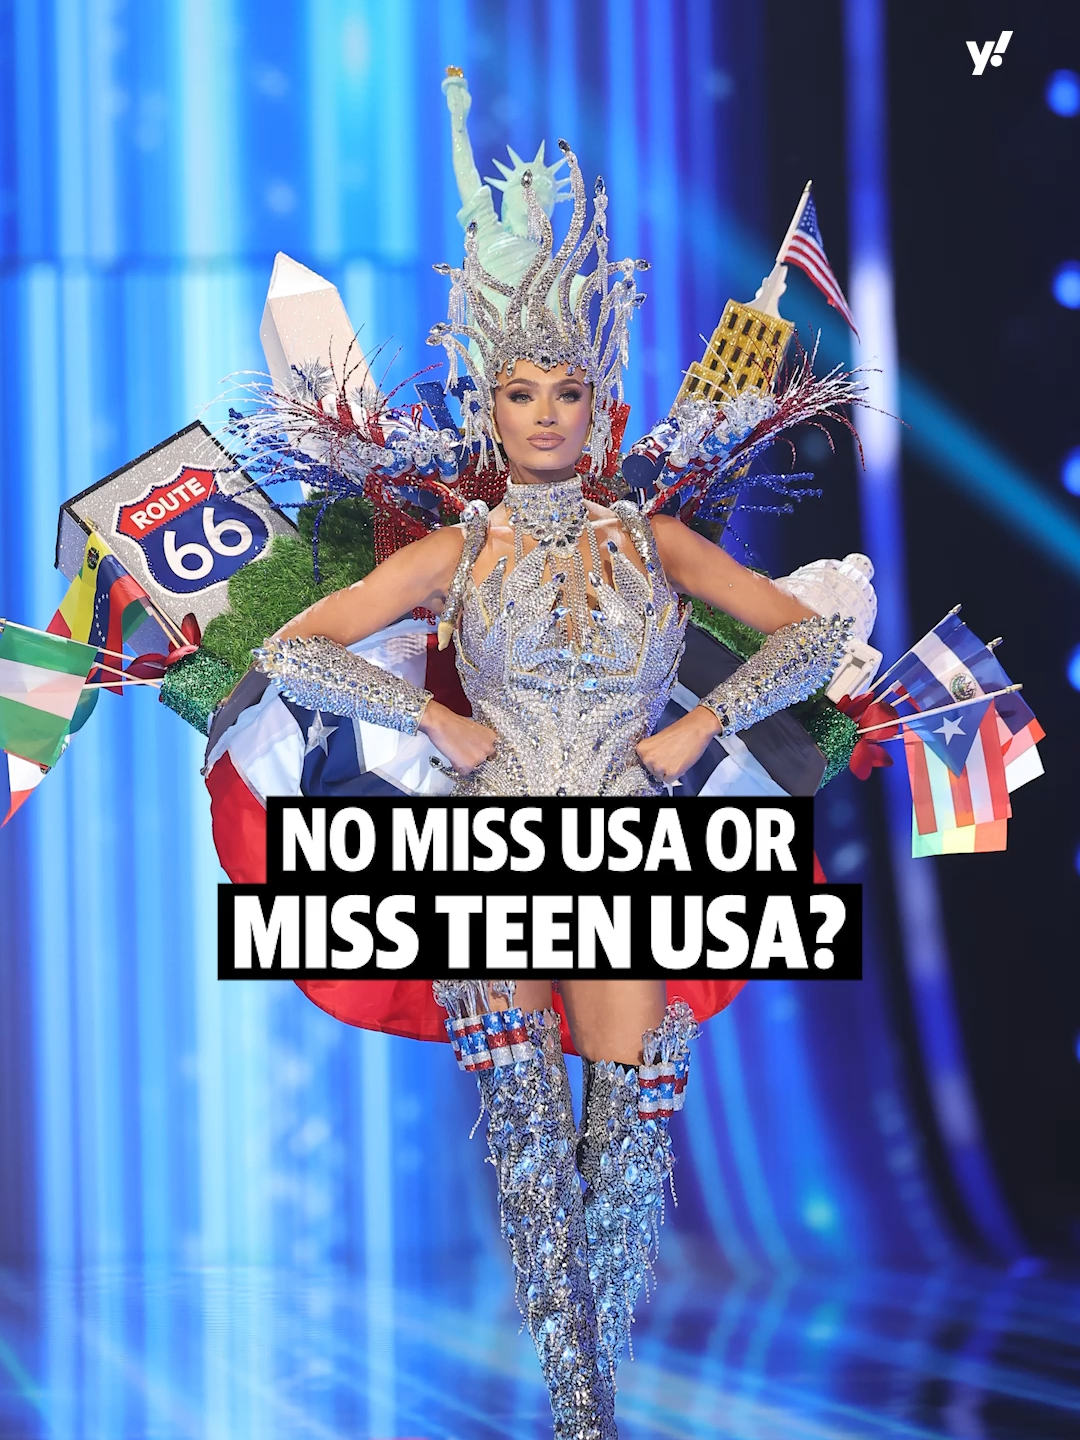 For the first time in 72 years, there isn't a Miss USA or Miss Teen USA titleholder after both pageant winners resigned. Here's why. #news #missusa #missteenusa #beautypageant #yahoonews